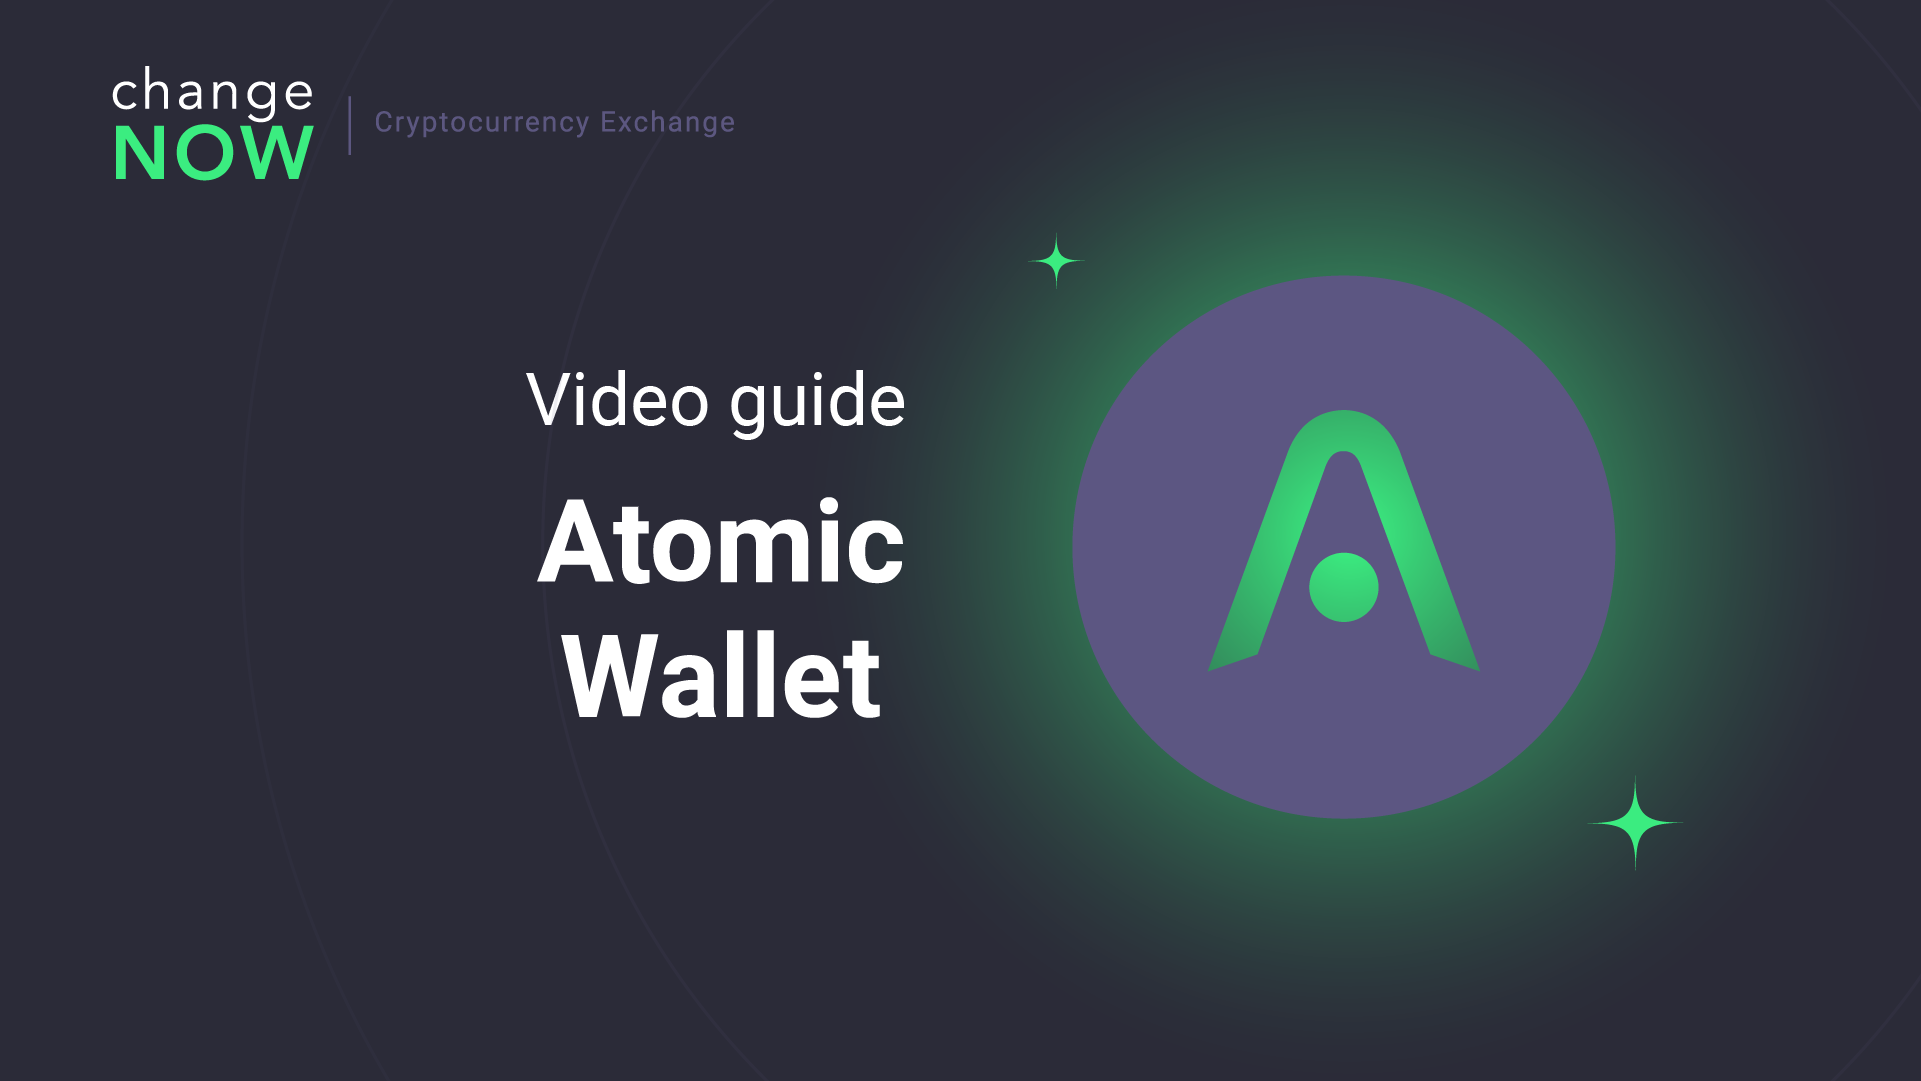 How To Perform A ChangeNOW Exchange In Atomic Wallet [GUIDE]